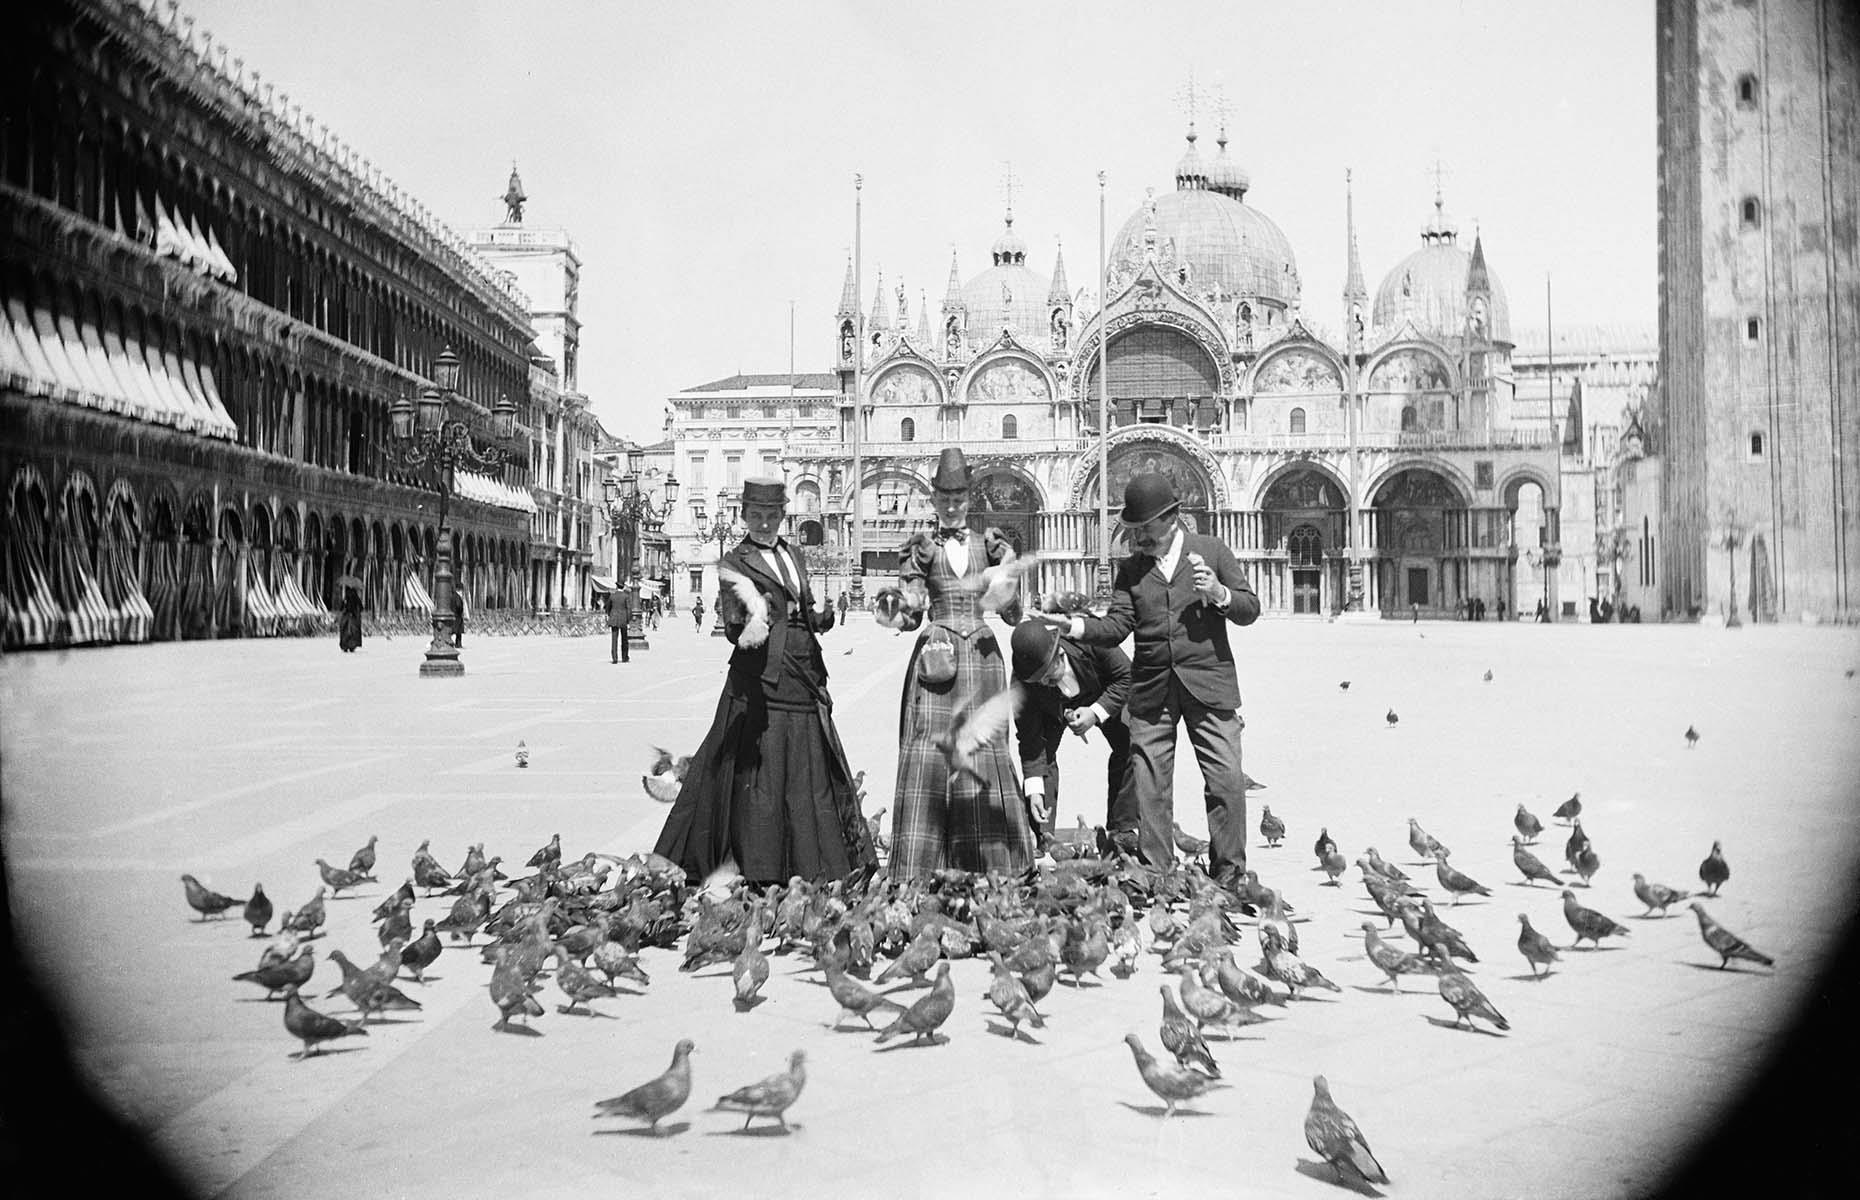 As travel became more popular towards the end of the 19th century, only the very upper echelons of society could afford to do so abroad and when they did, it was normally a multi-destination tour, spanning weeks if not months. Italy was one of the first destinations to charm, from its seaside retreats to beguiling cities. This charming snap captures wealthy travelers feeding pigeons in Piazza San Marco in Venice in 1894.